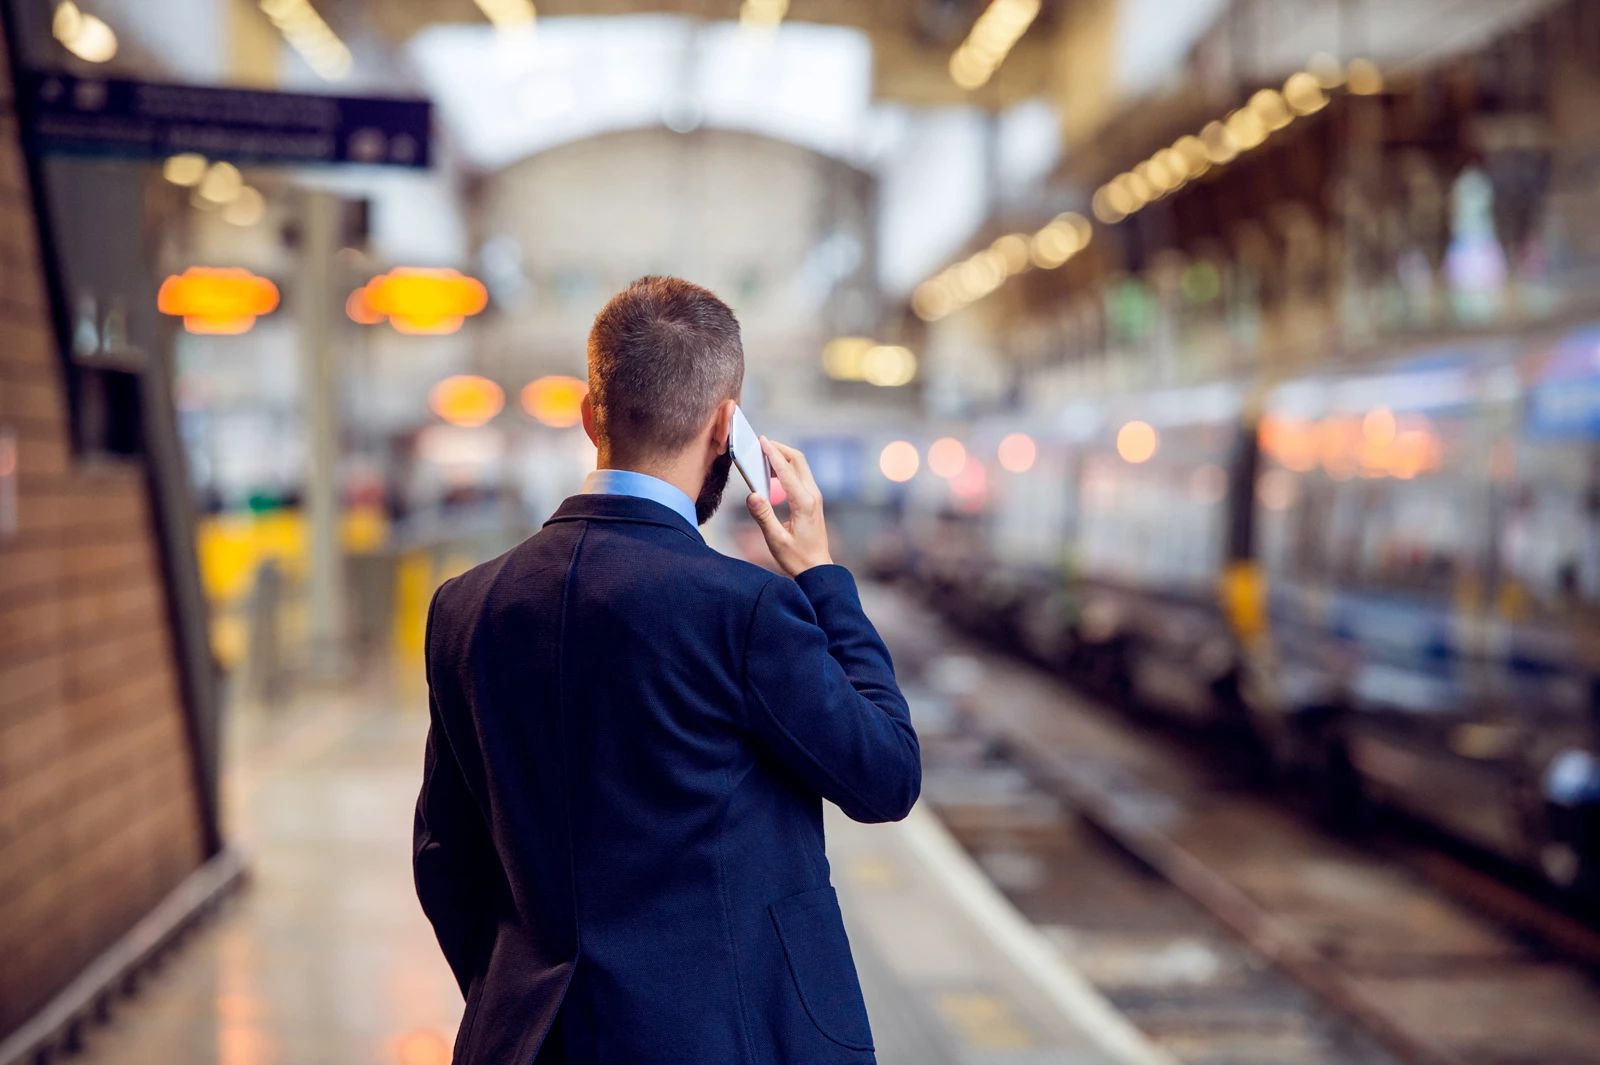 Business man on phone standing at train station